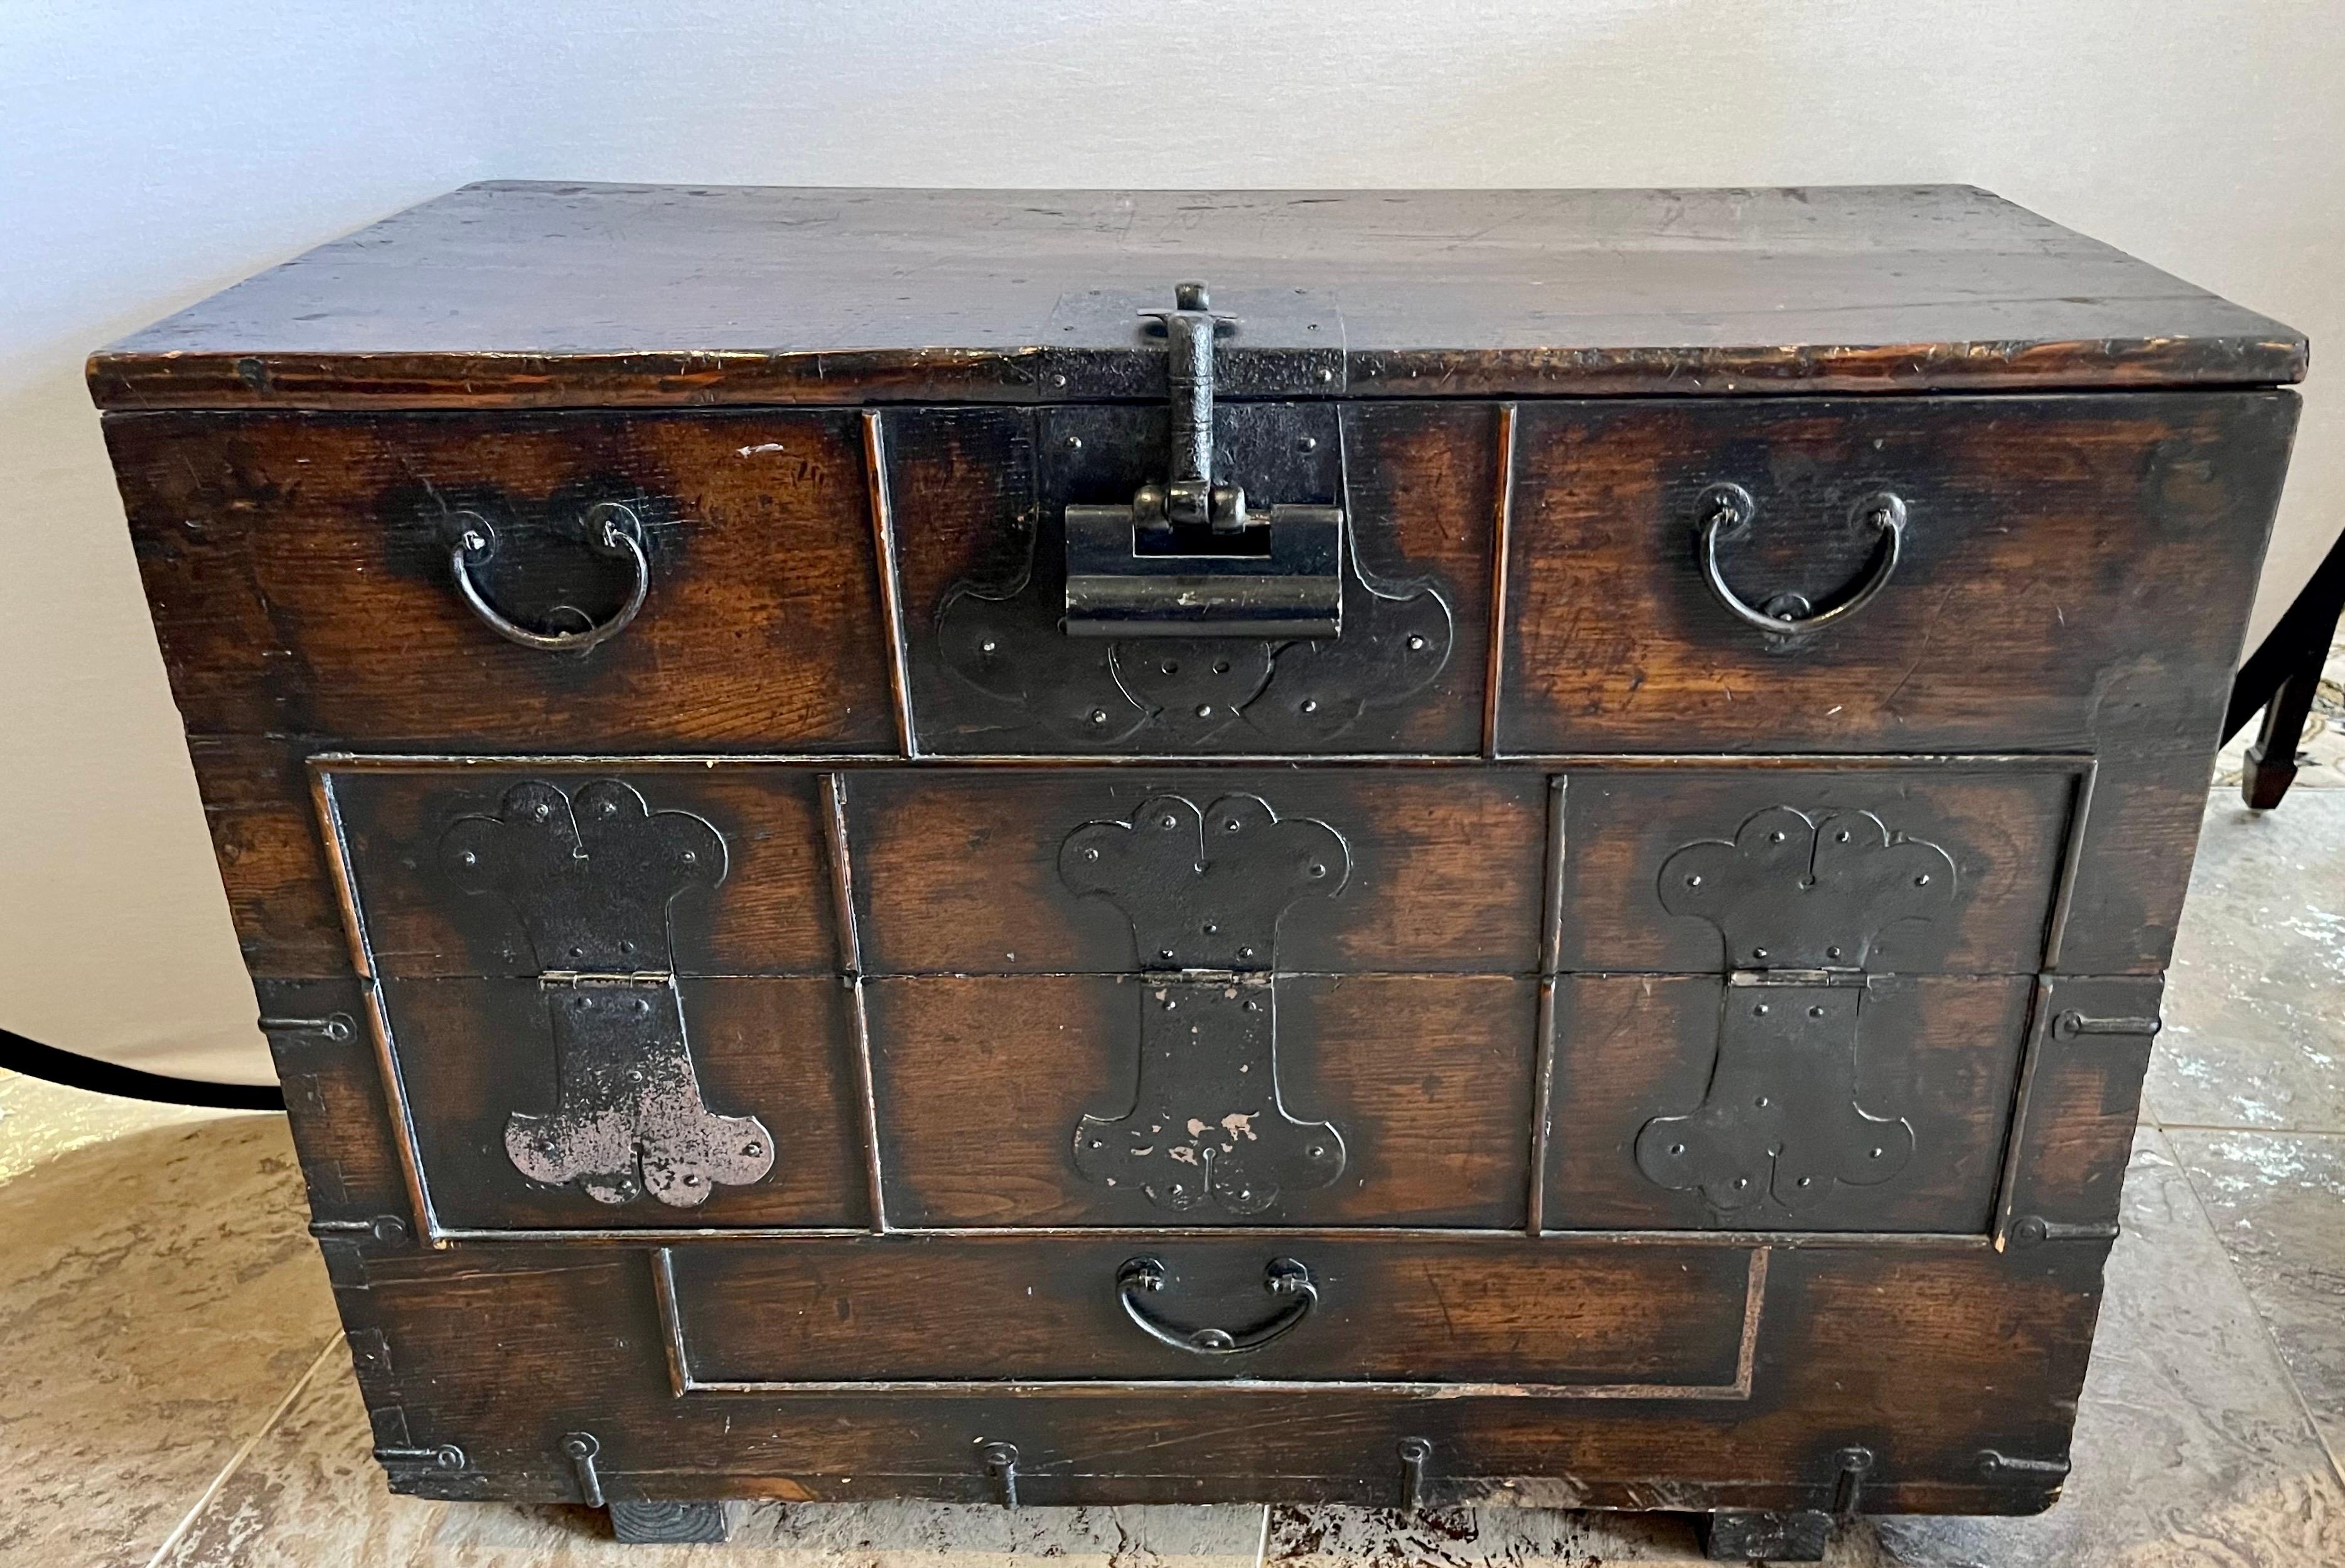 Antique Korean Bandaji Blanket Chest is made from elm and pine and is embellished with patina iron fittings and hinges. It has a drop down door that opens to a large interior storage area for clothes or valuables.